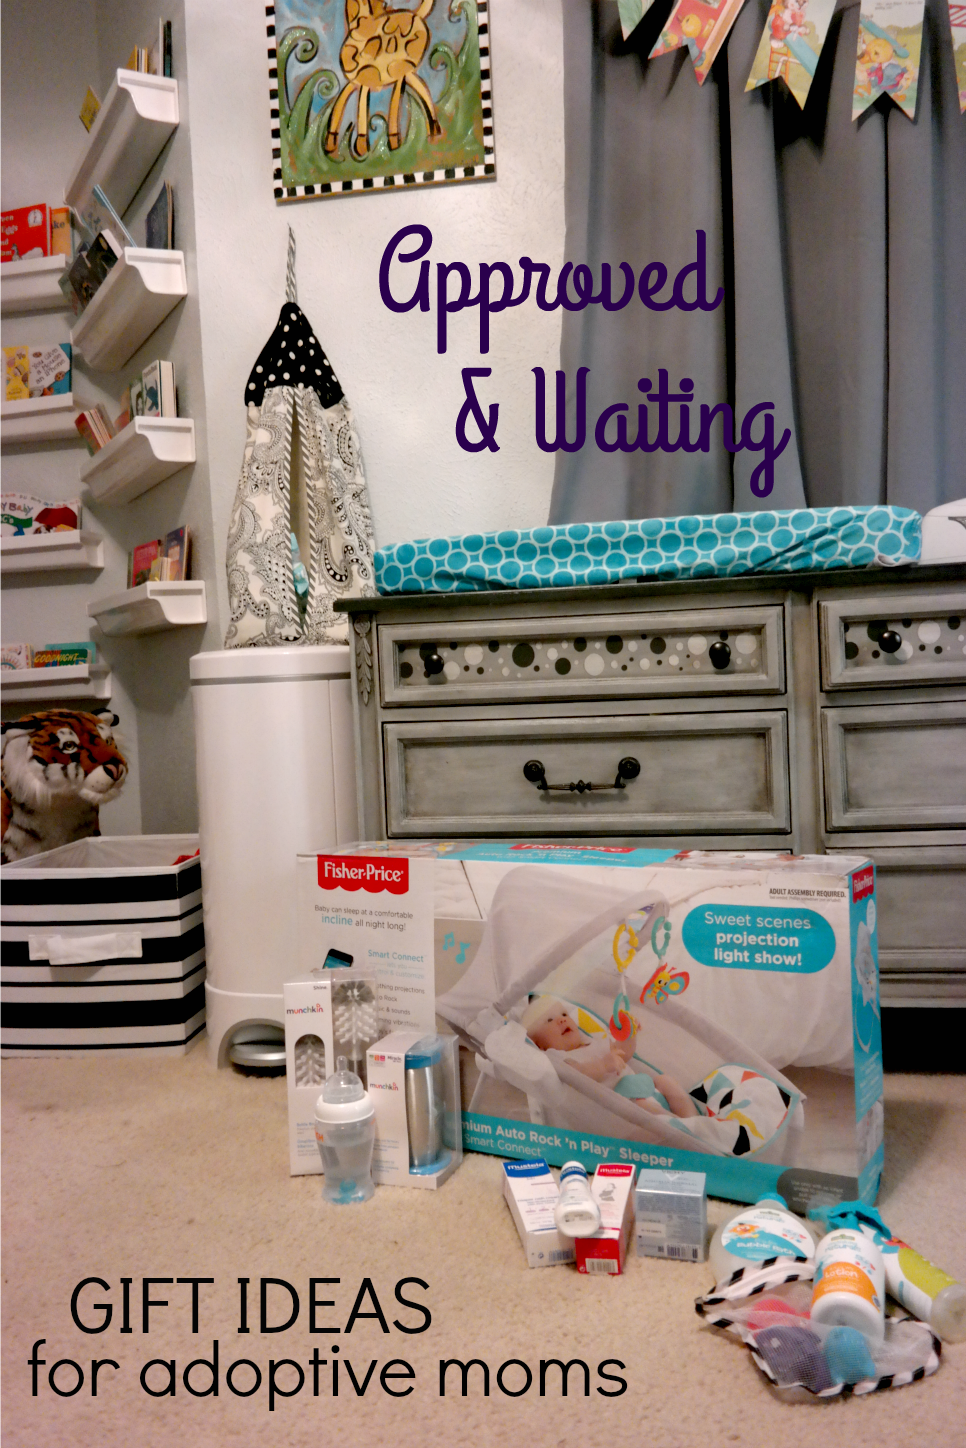 Approved & Waiting: Gift Ideas for an Adoptive Mom